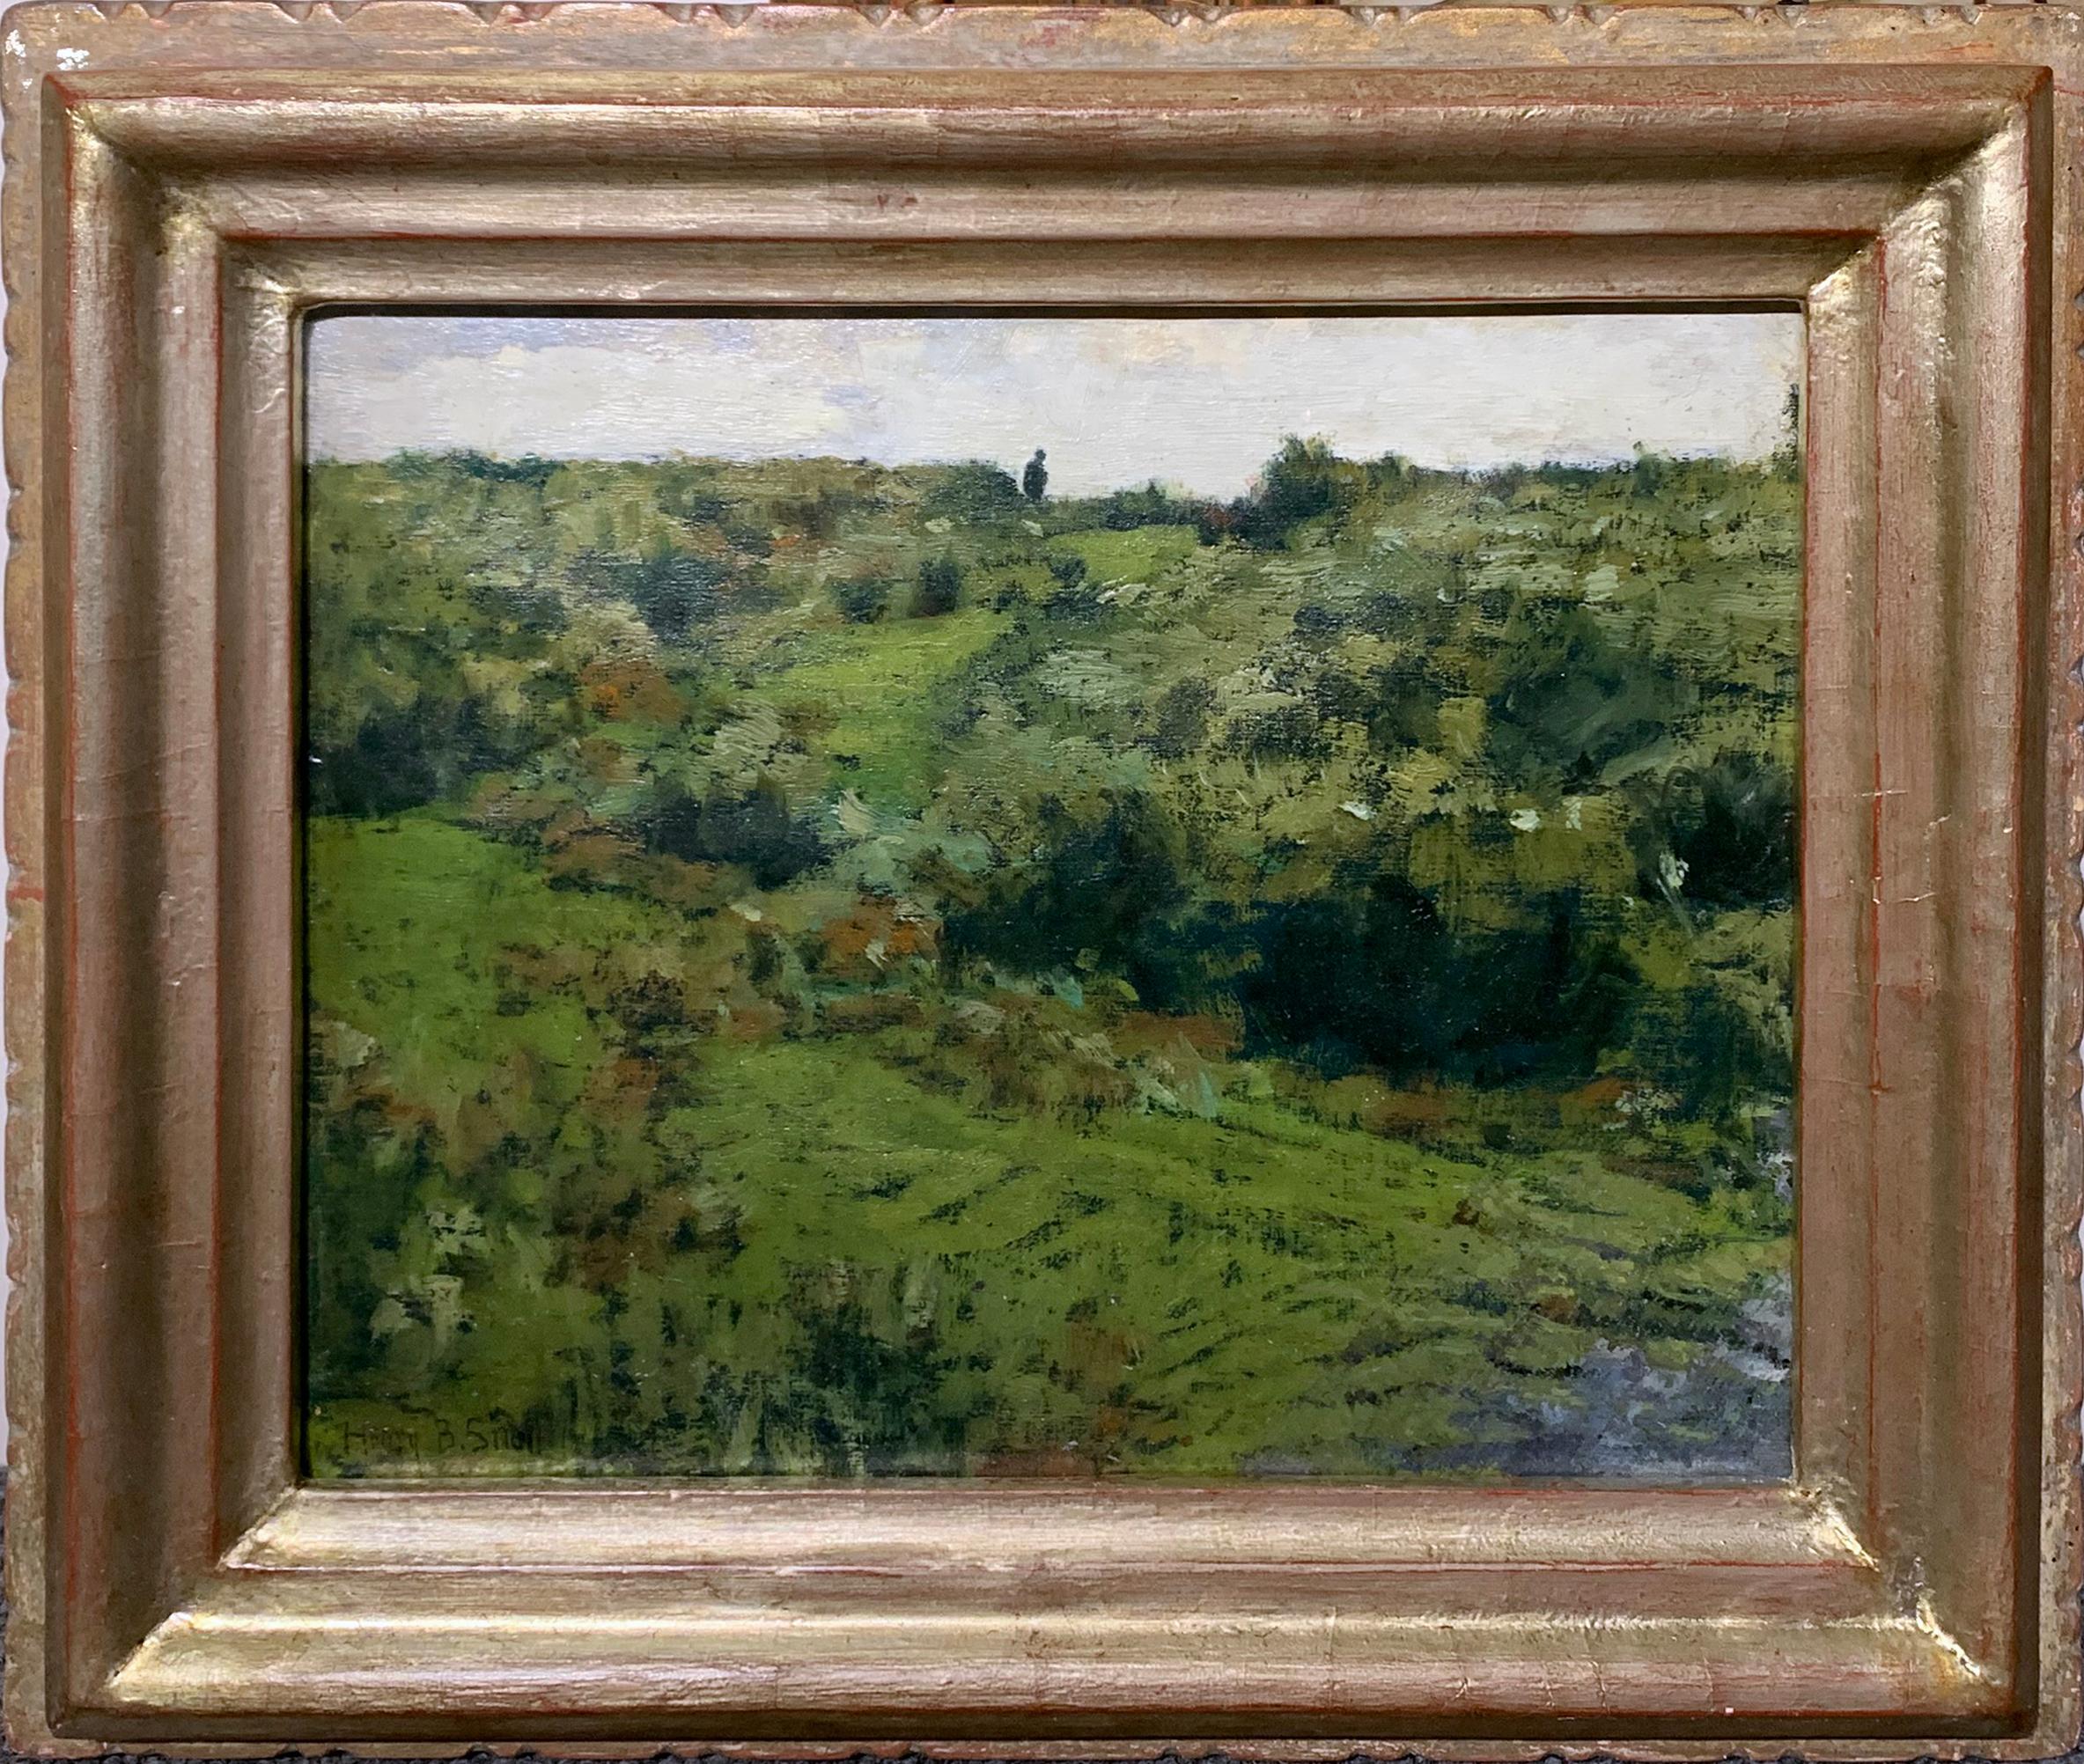 Top of the Hill, American Impressionist Landscape with Figure, New Hope School - Painting by Henry Bayley Snell